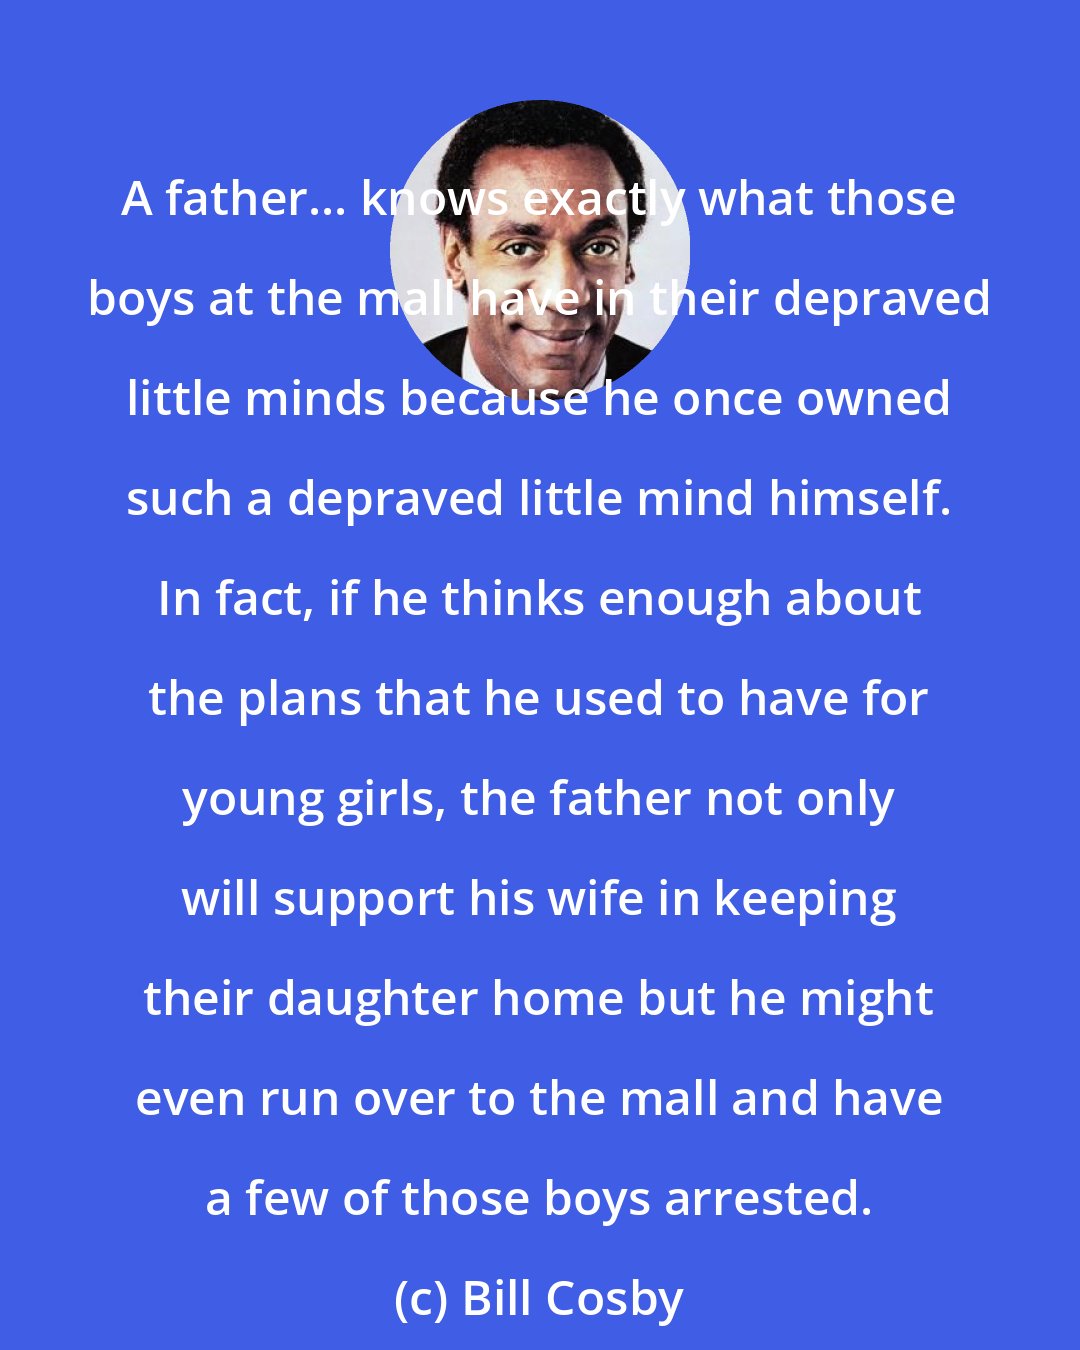 Bill Cosby: A father... knows exactly what those boys at the mall have in their depraved little minds because he once owned such a depraved little mind himself. In fact, if he thinks enough about the plans that he used to have for young girls, the father not only will support his wife in keeping their daughter home but he might even run over to the mall and have a few of those boys arrested.